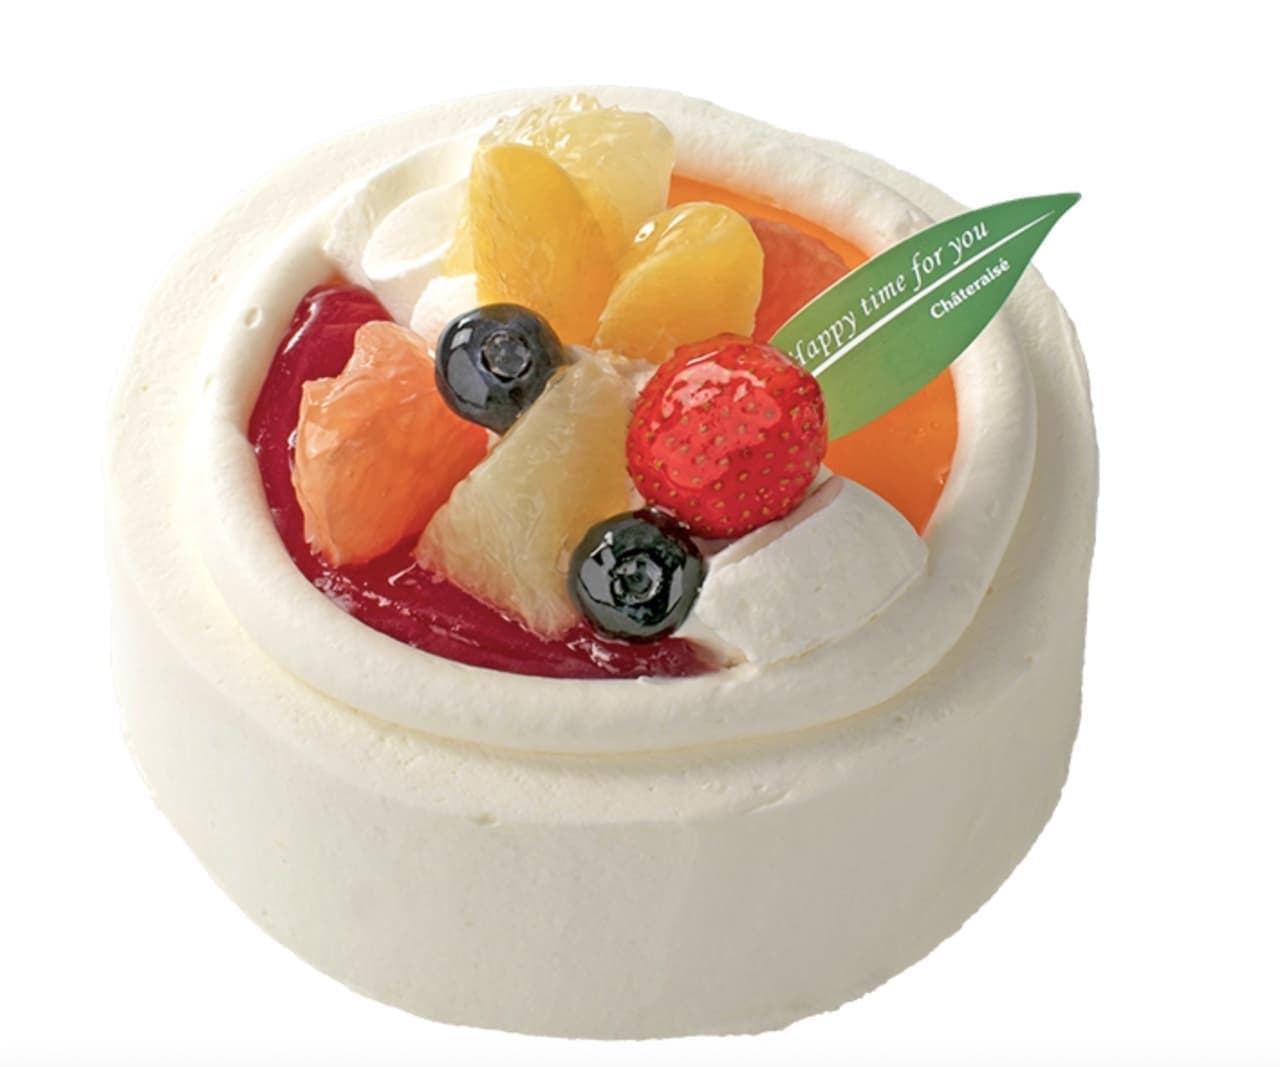 Chateraise "Strawberry and Citrus Souffle Cheese Decoration"